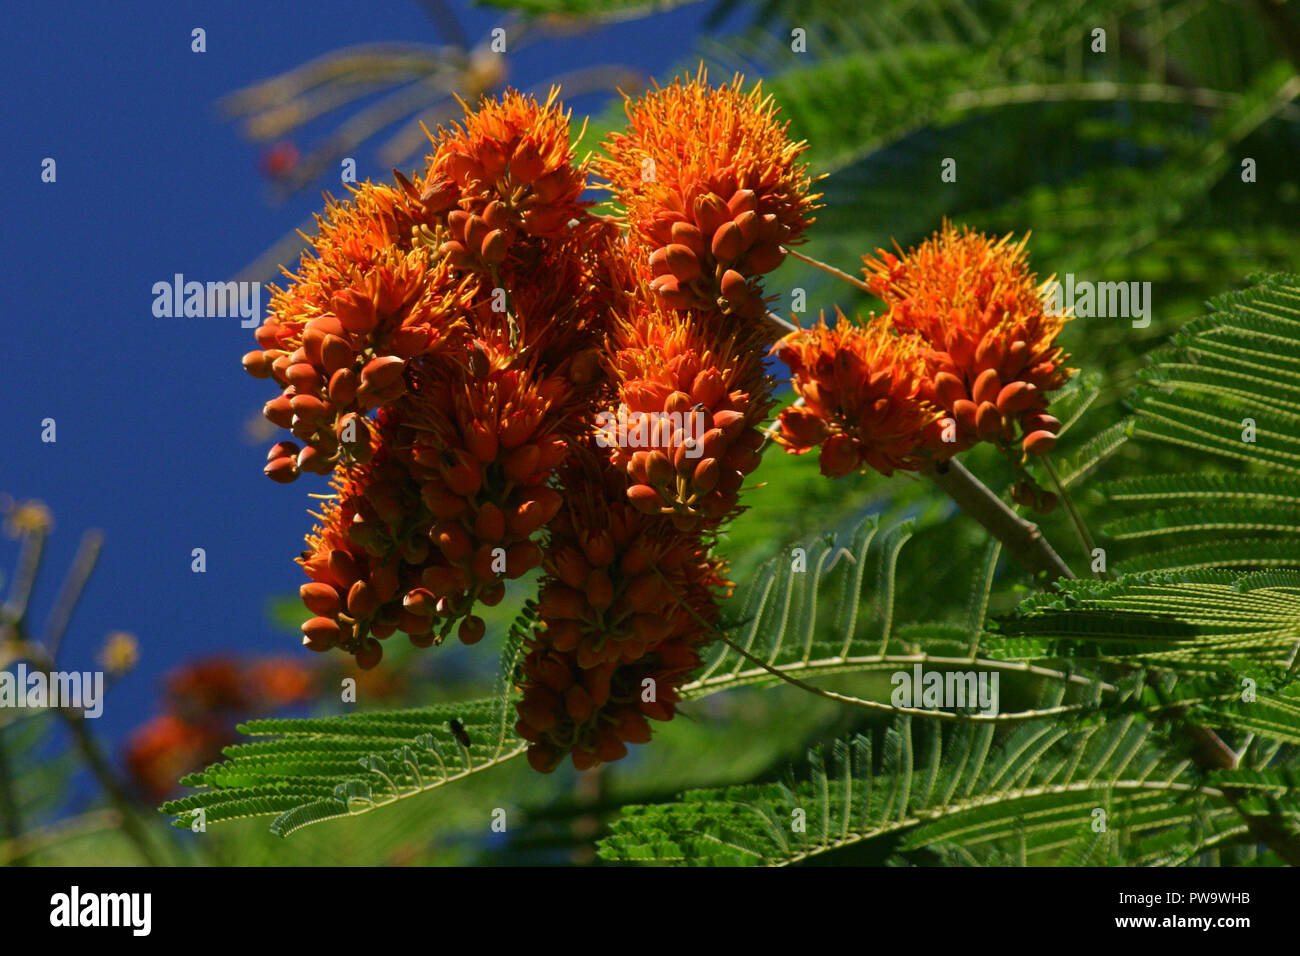 Colvillea racemosa in the Fabaceae family also known by the common name Colville's Glory, Queensland, Australia Stock Photo